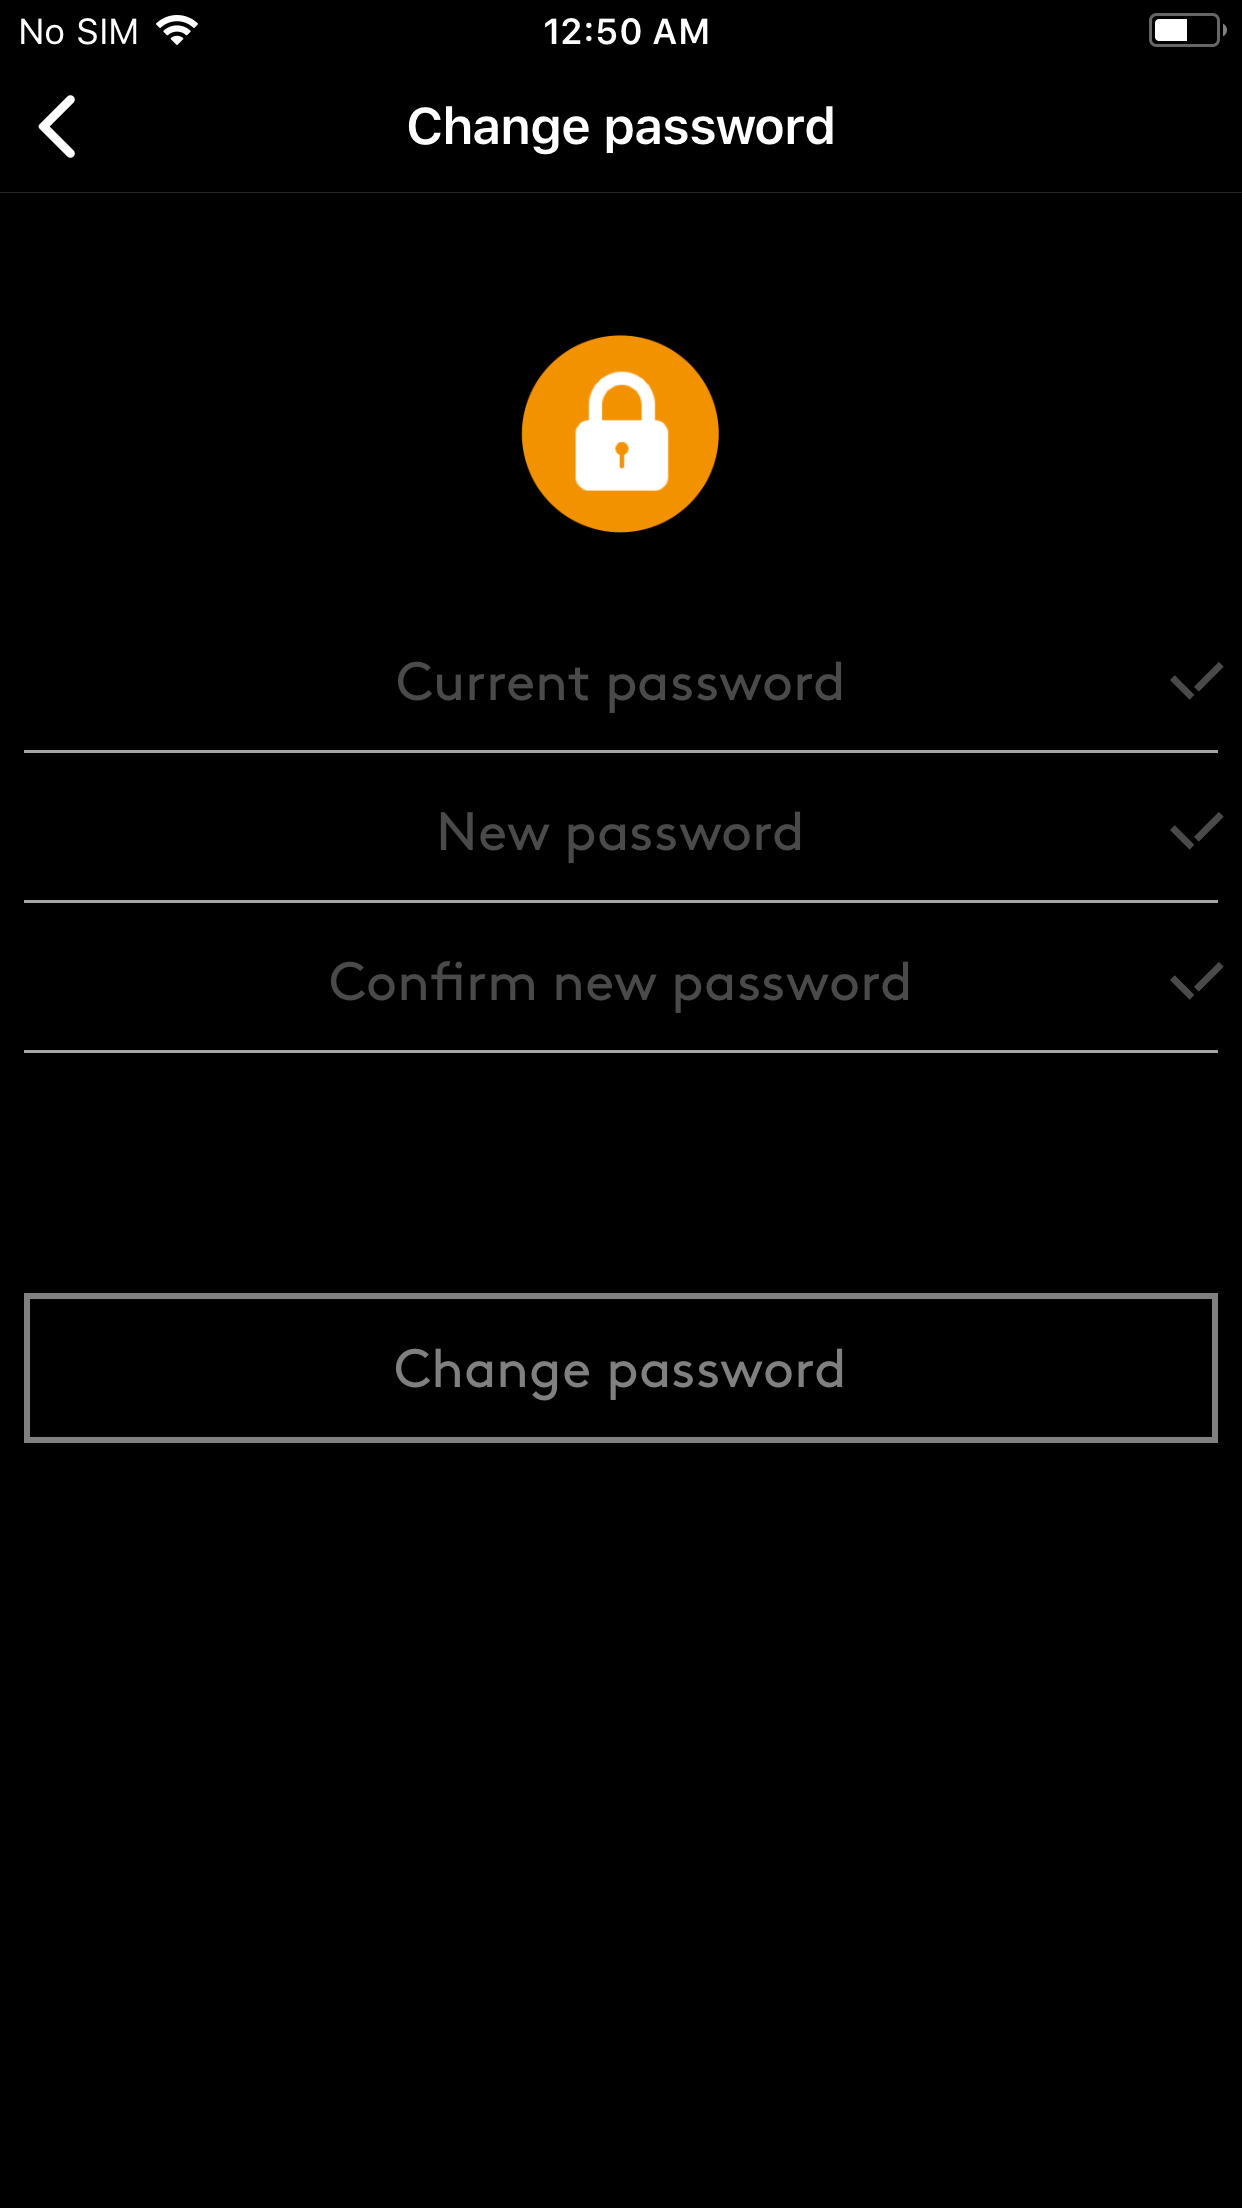 wickr switchboard login has timed out